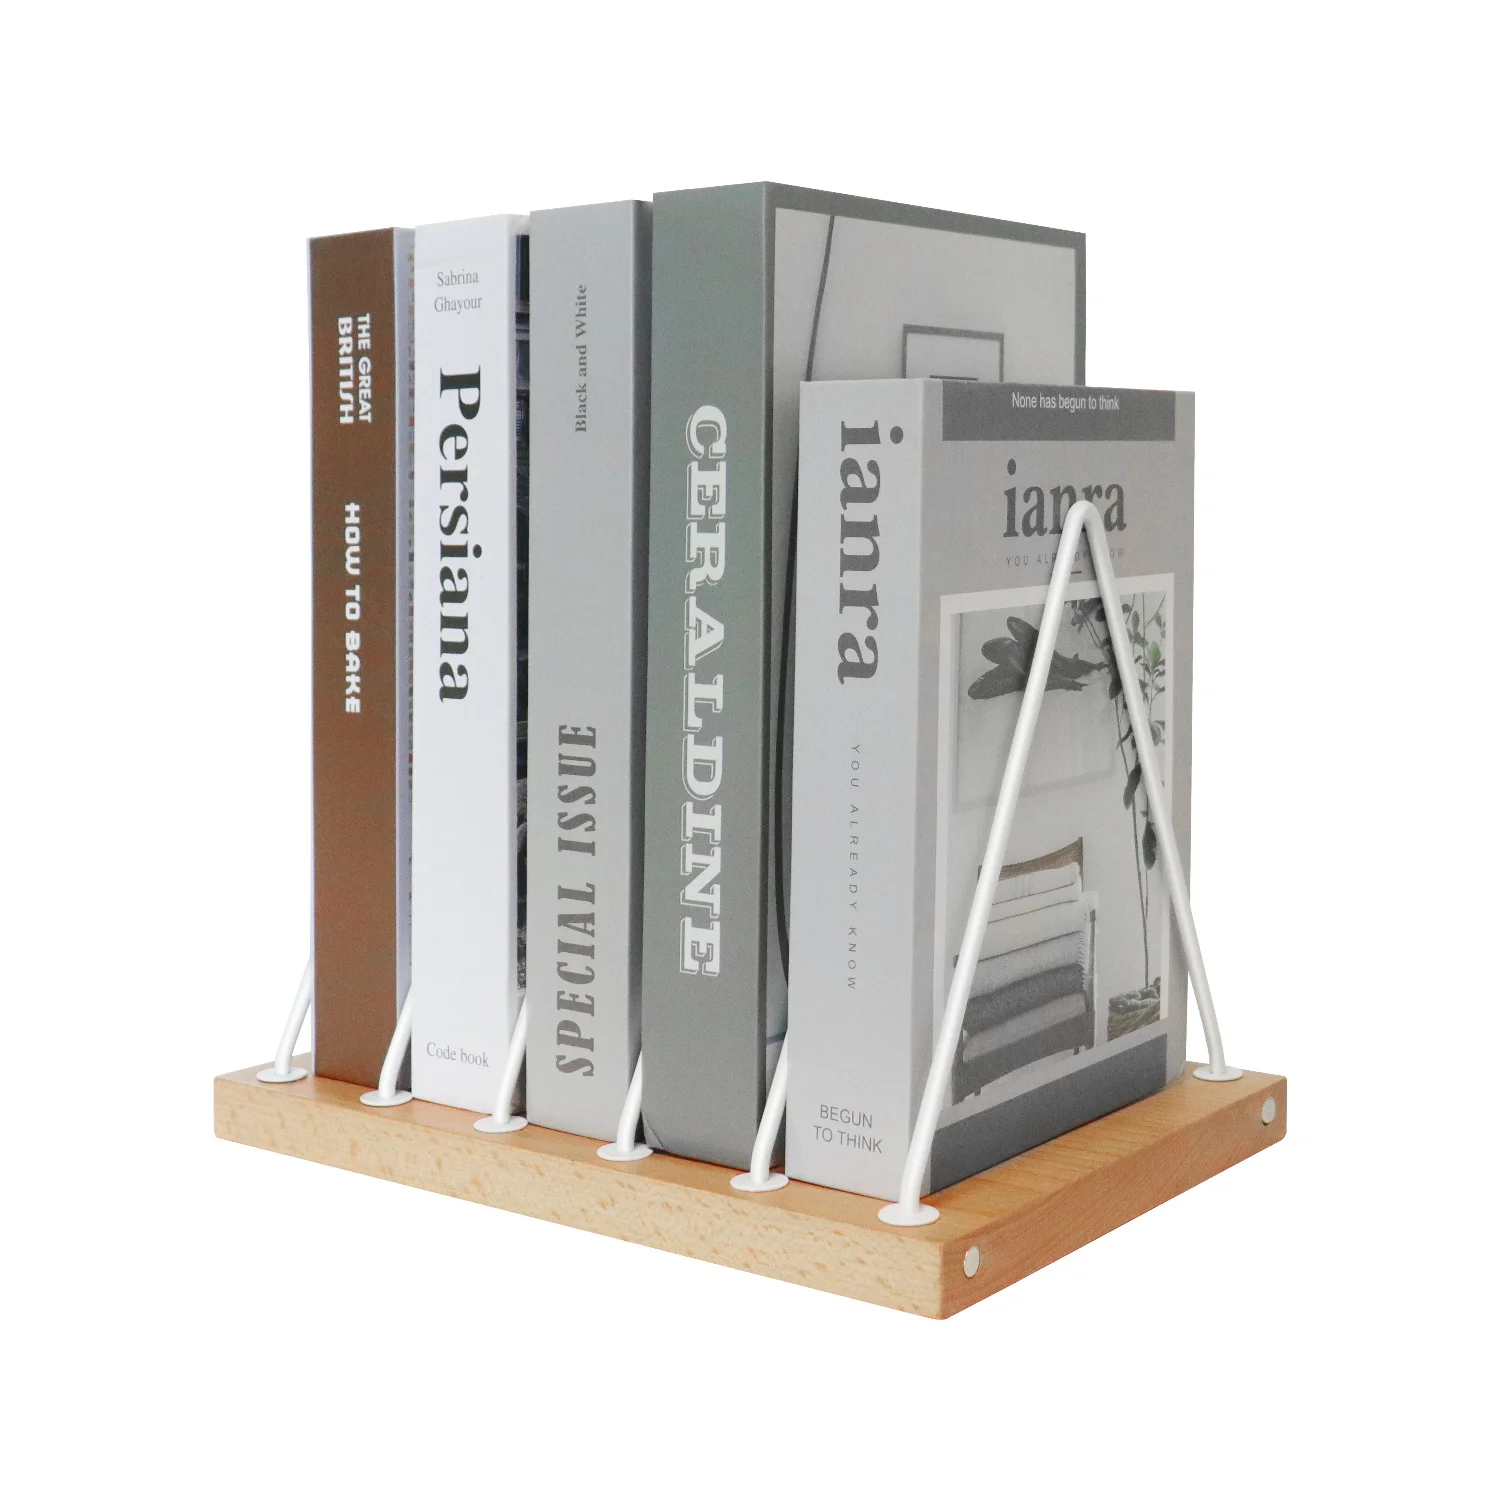 

Wooden Bookends Wood Book Ends Holder Shelf Rack Document File Tray Magazine Stationery Desk Organizer Office Accessories